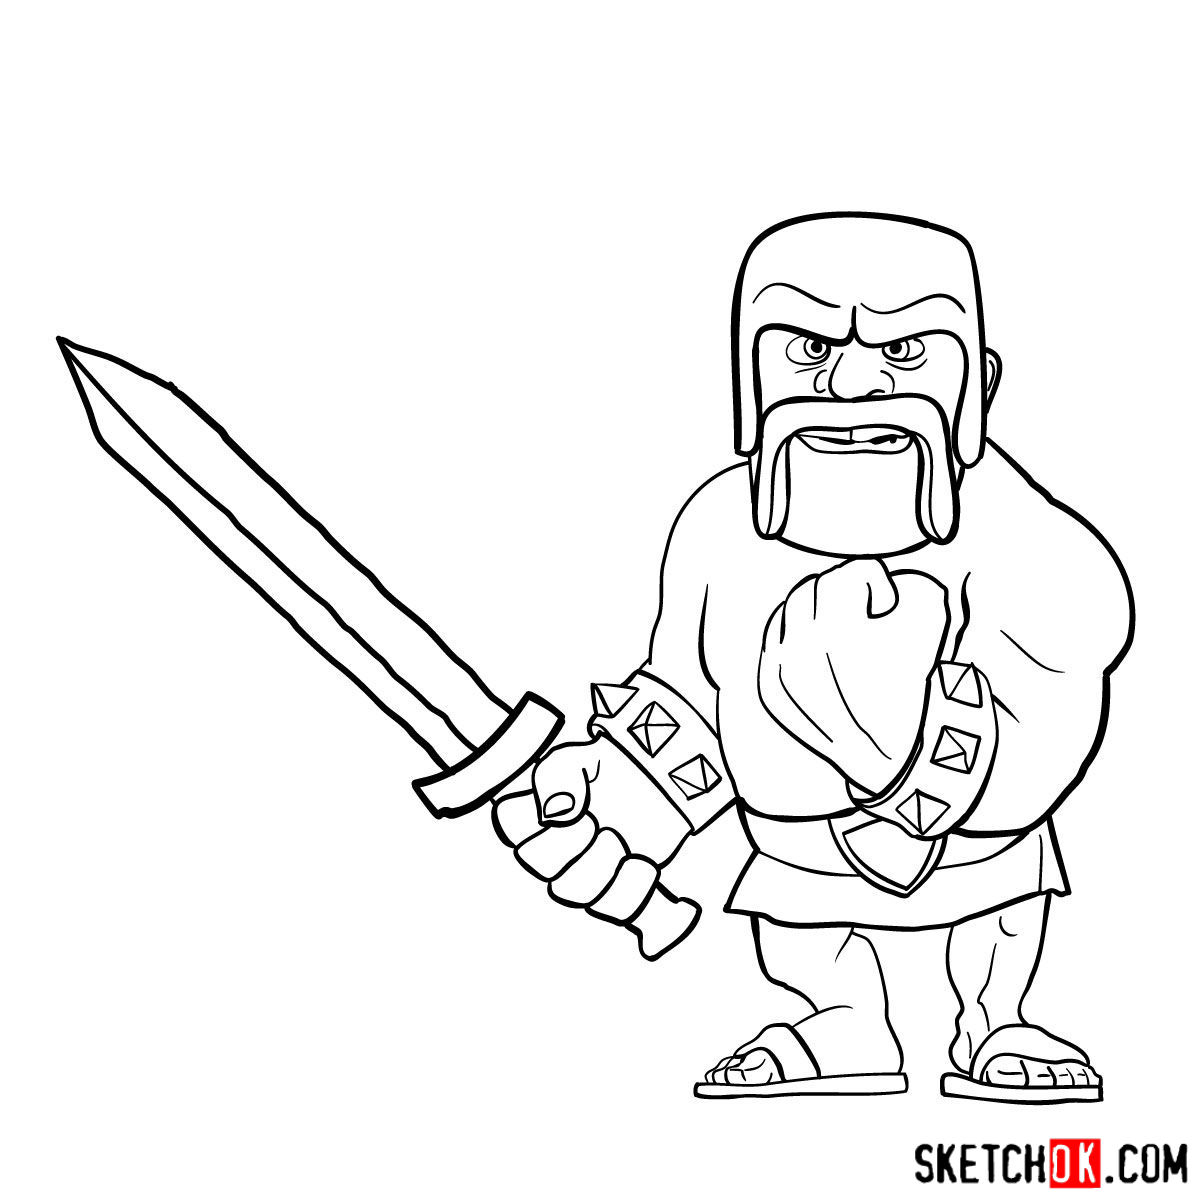 How to draw Barbarian from Clash of Clans - step 12